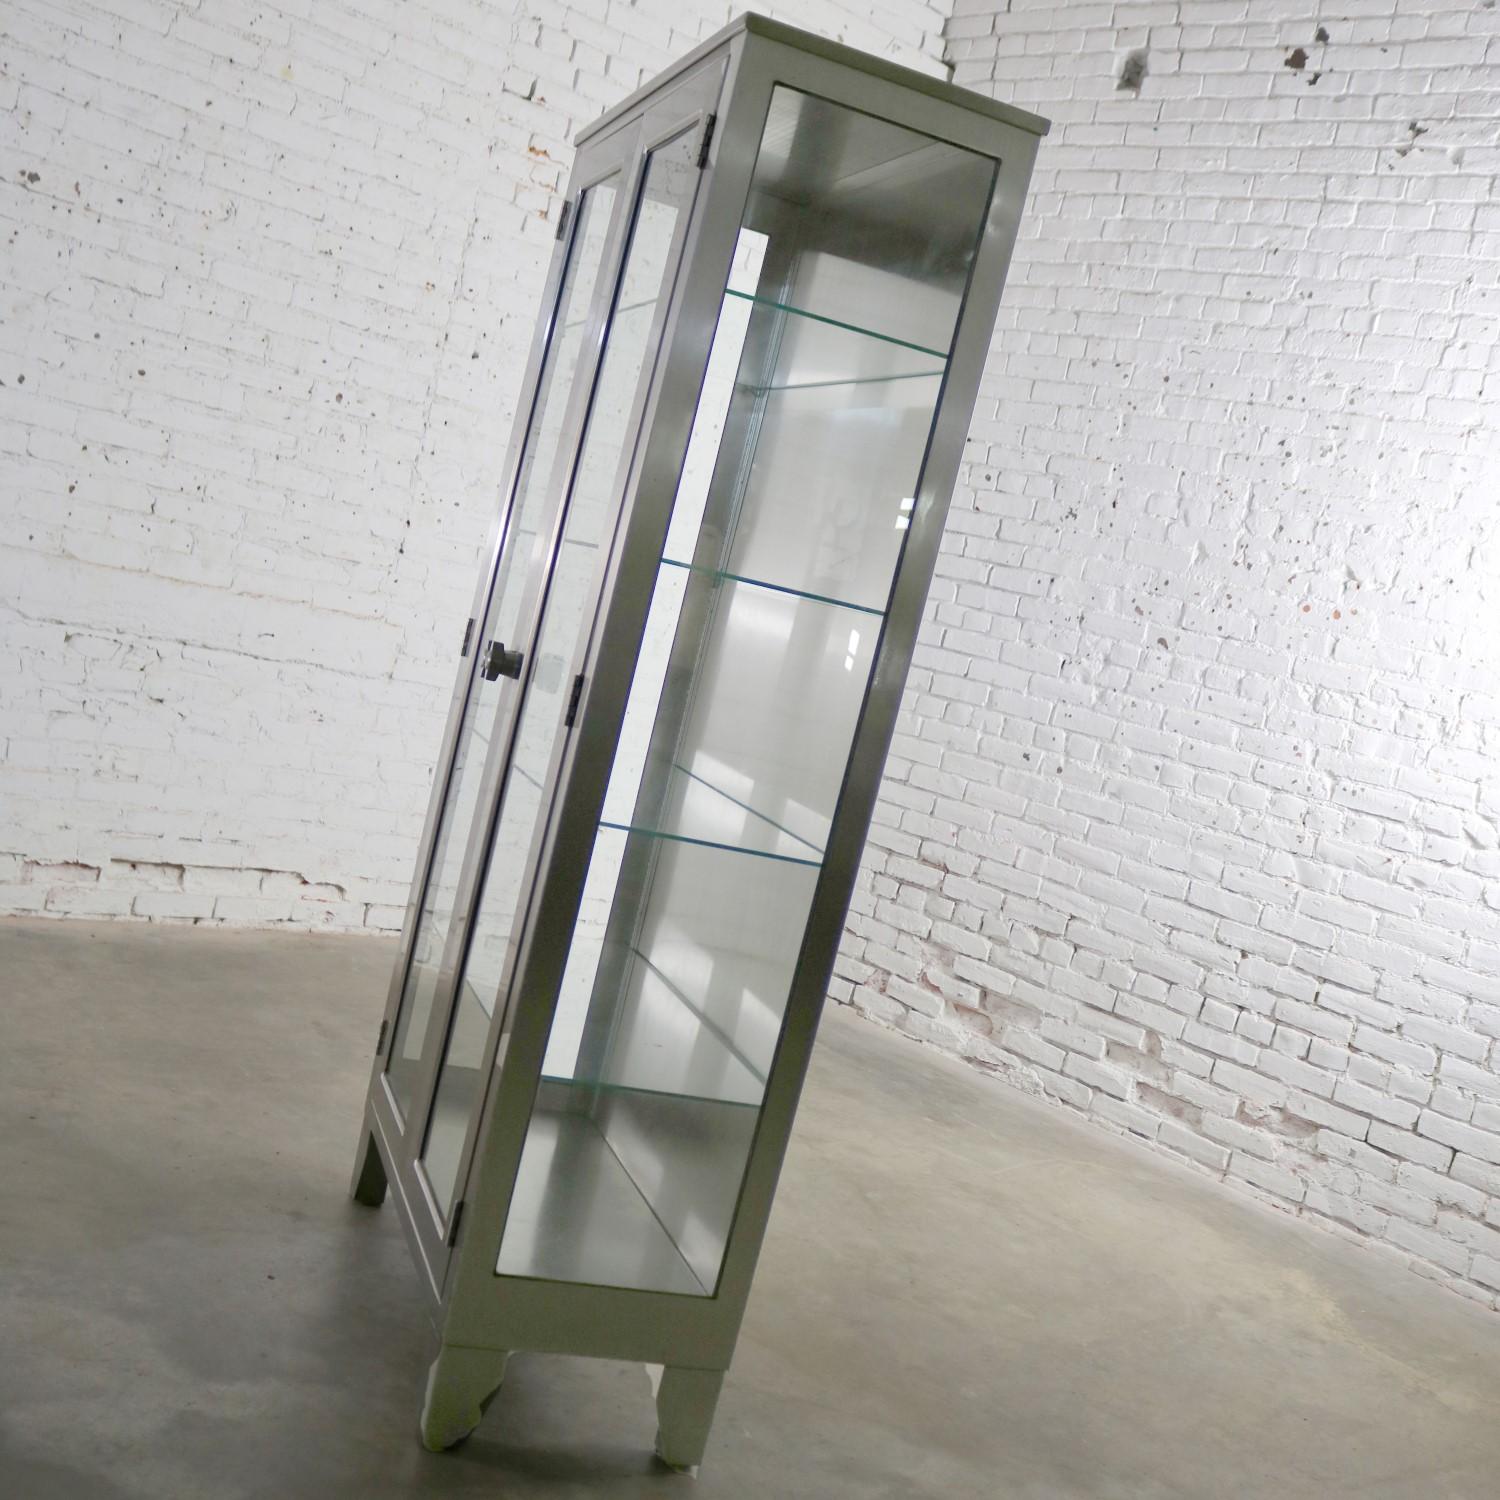 stainless steel medical cabinet